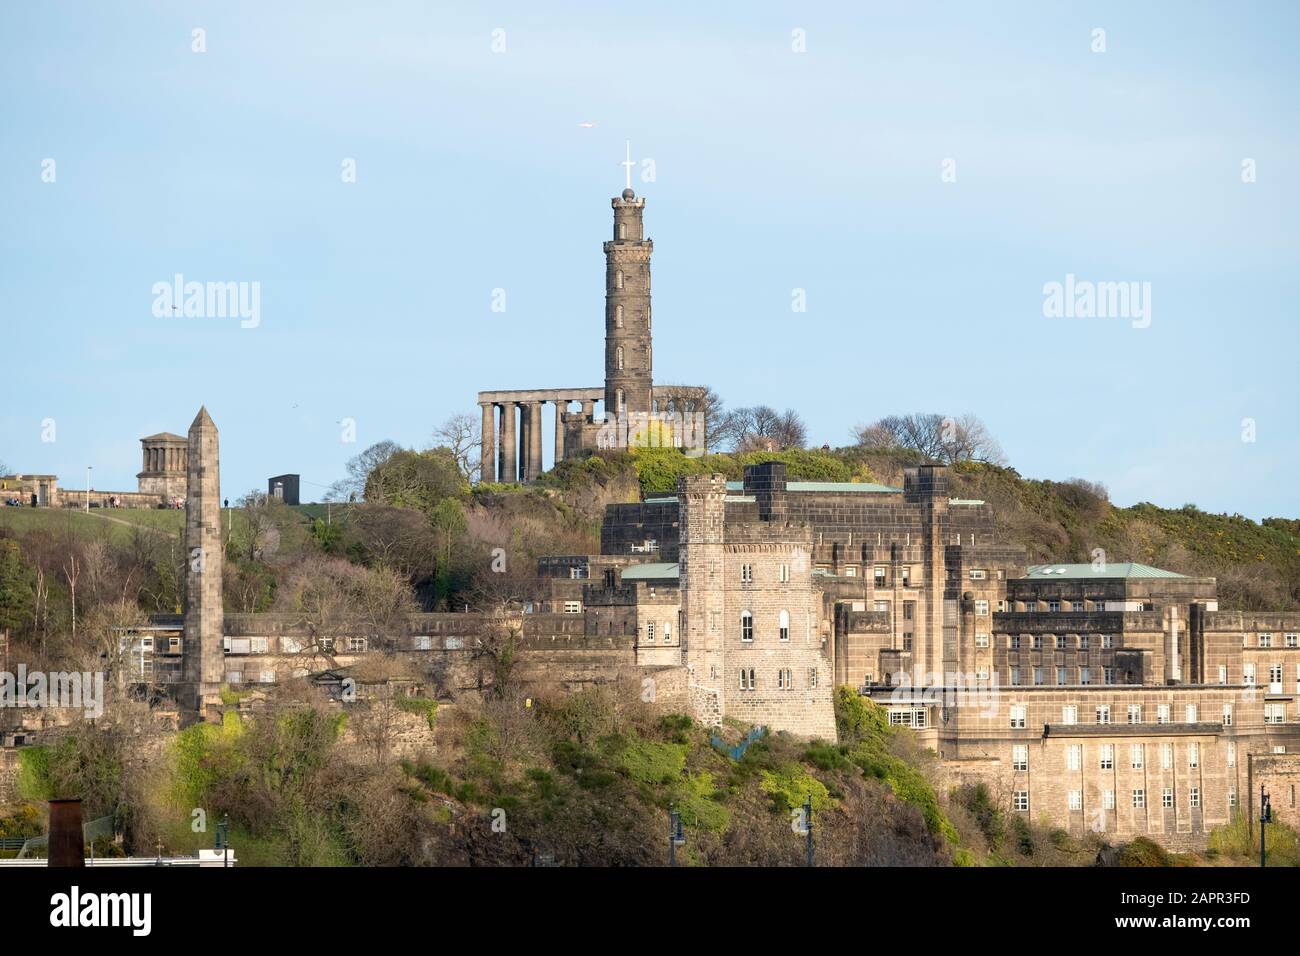 Historic buildings on Calton Hill, Edinburgh: The Martyrs Monument, Nelson's monument, St Andrews House and Governors House of the old Calton Jail. Stock Photo